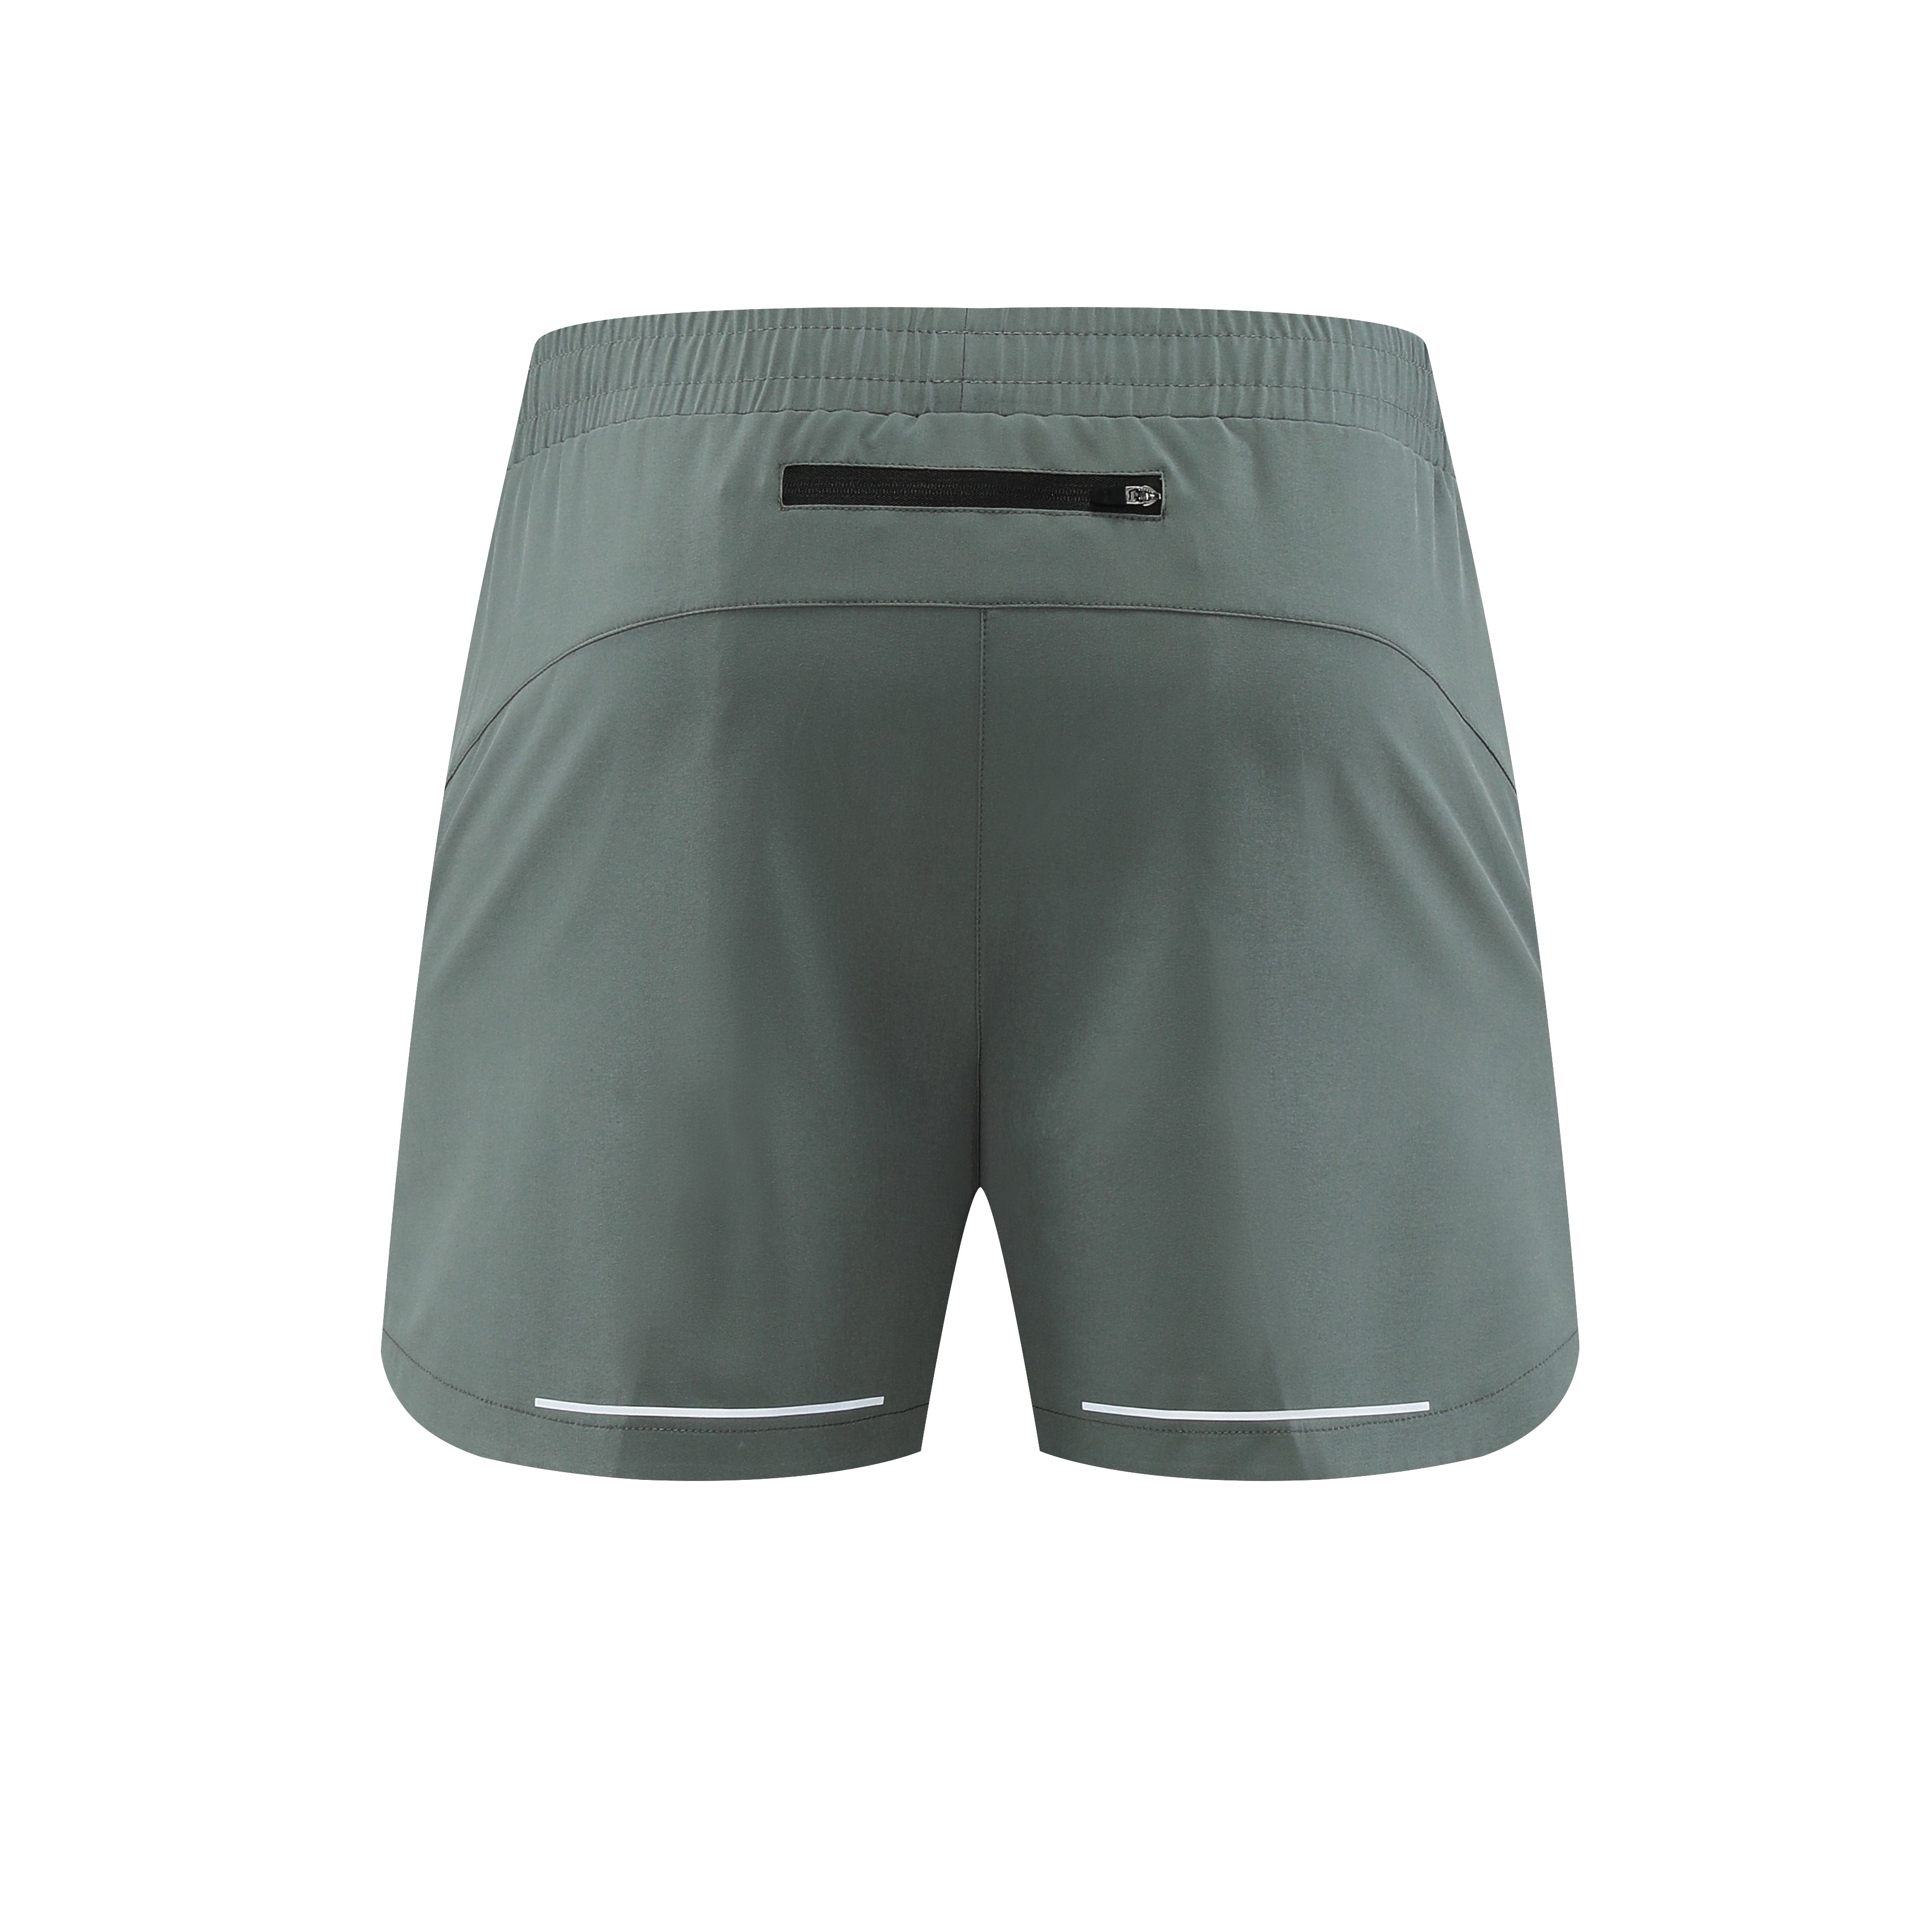 Men's Quick Dry Lifted Graphic Shorts